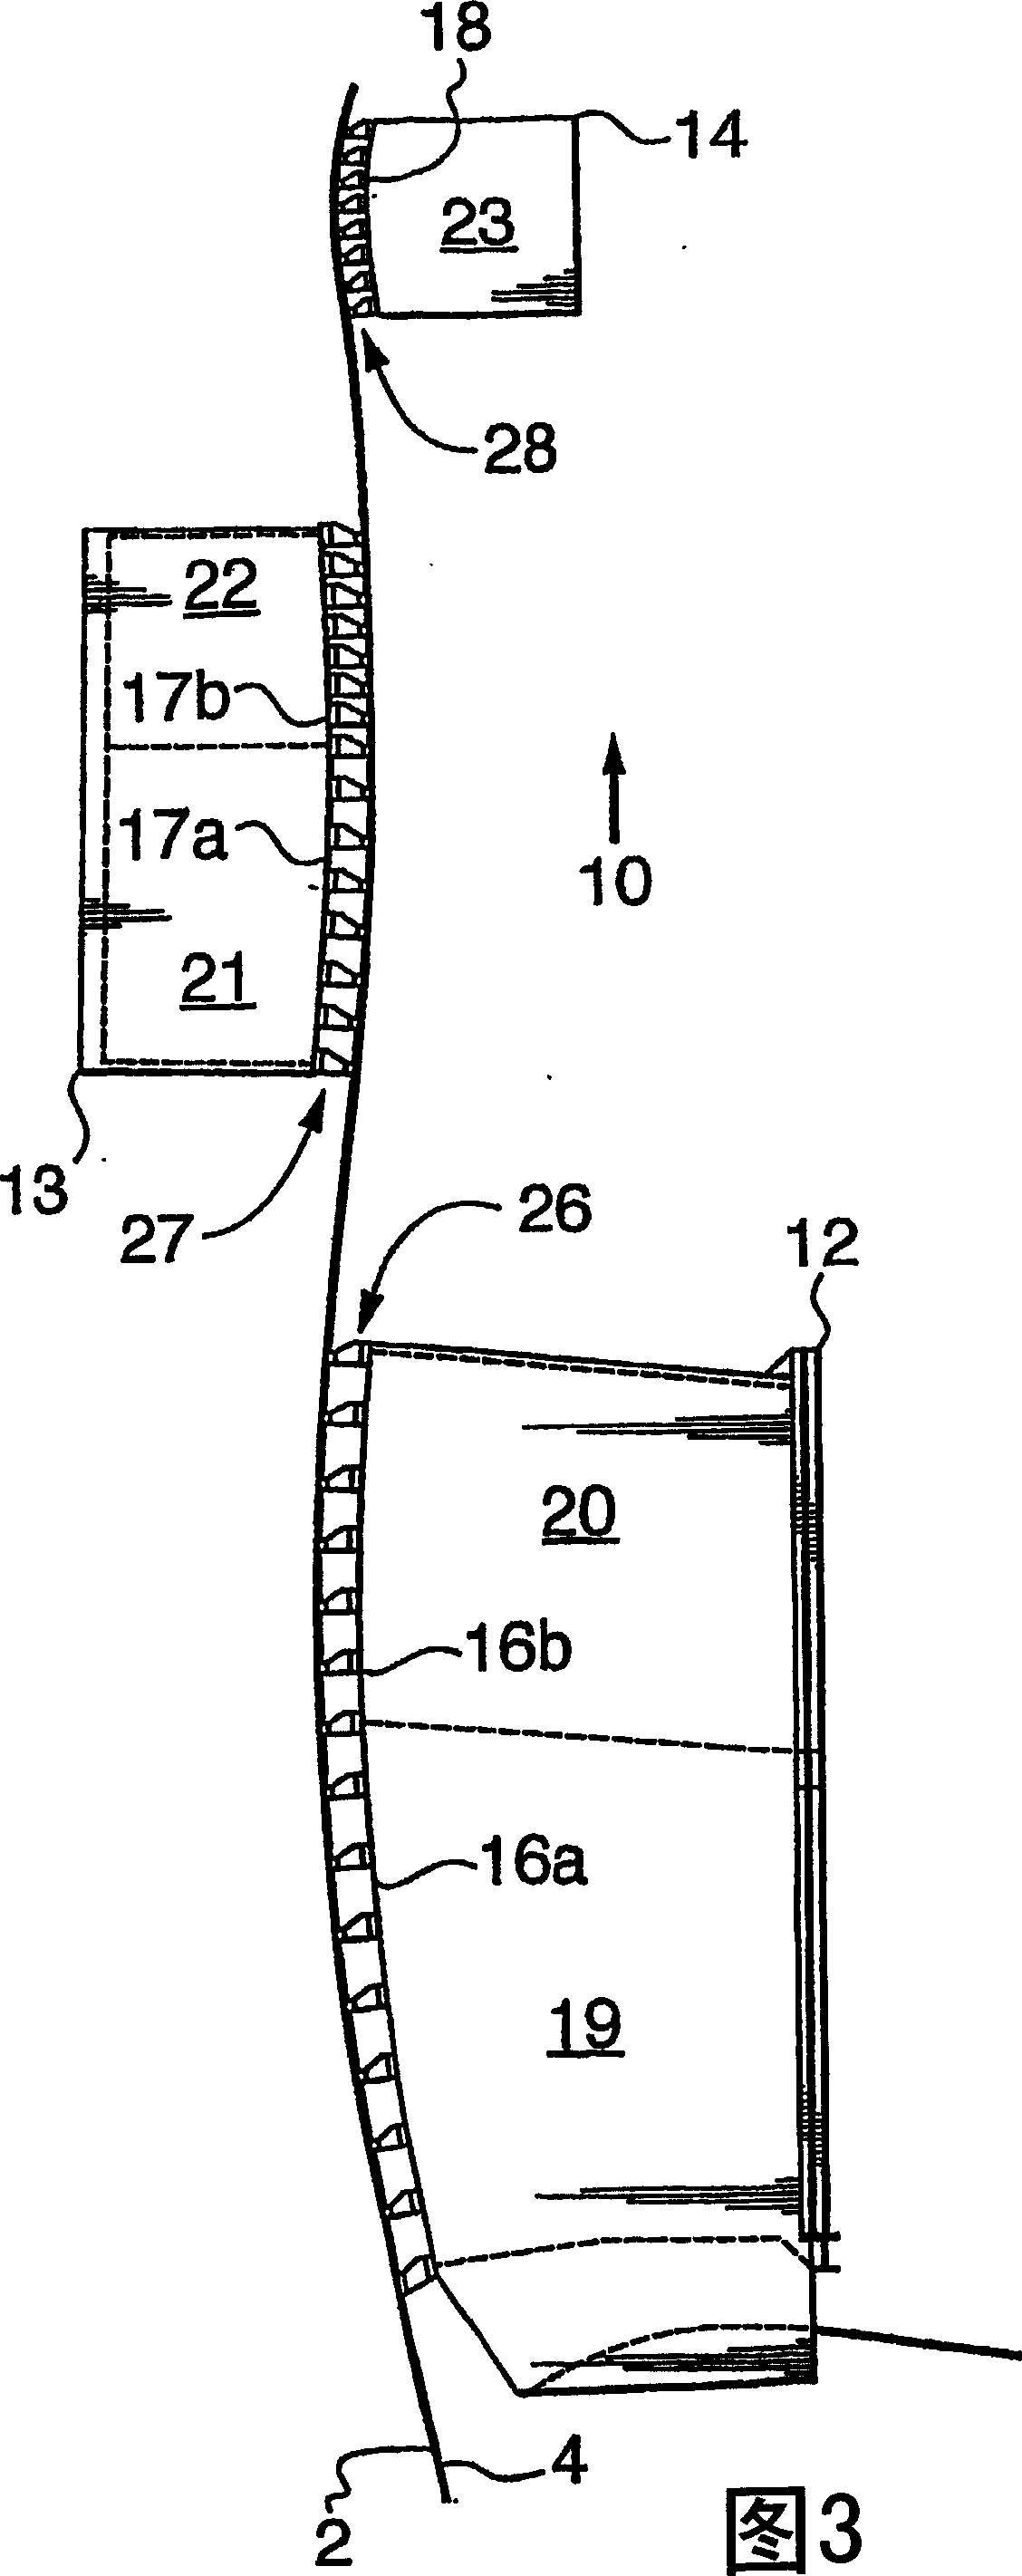 Gap type forming section for a two fabric paper making machine